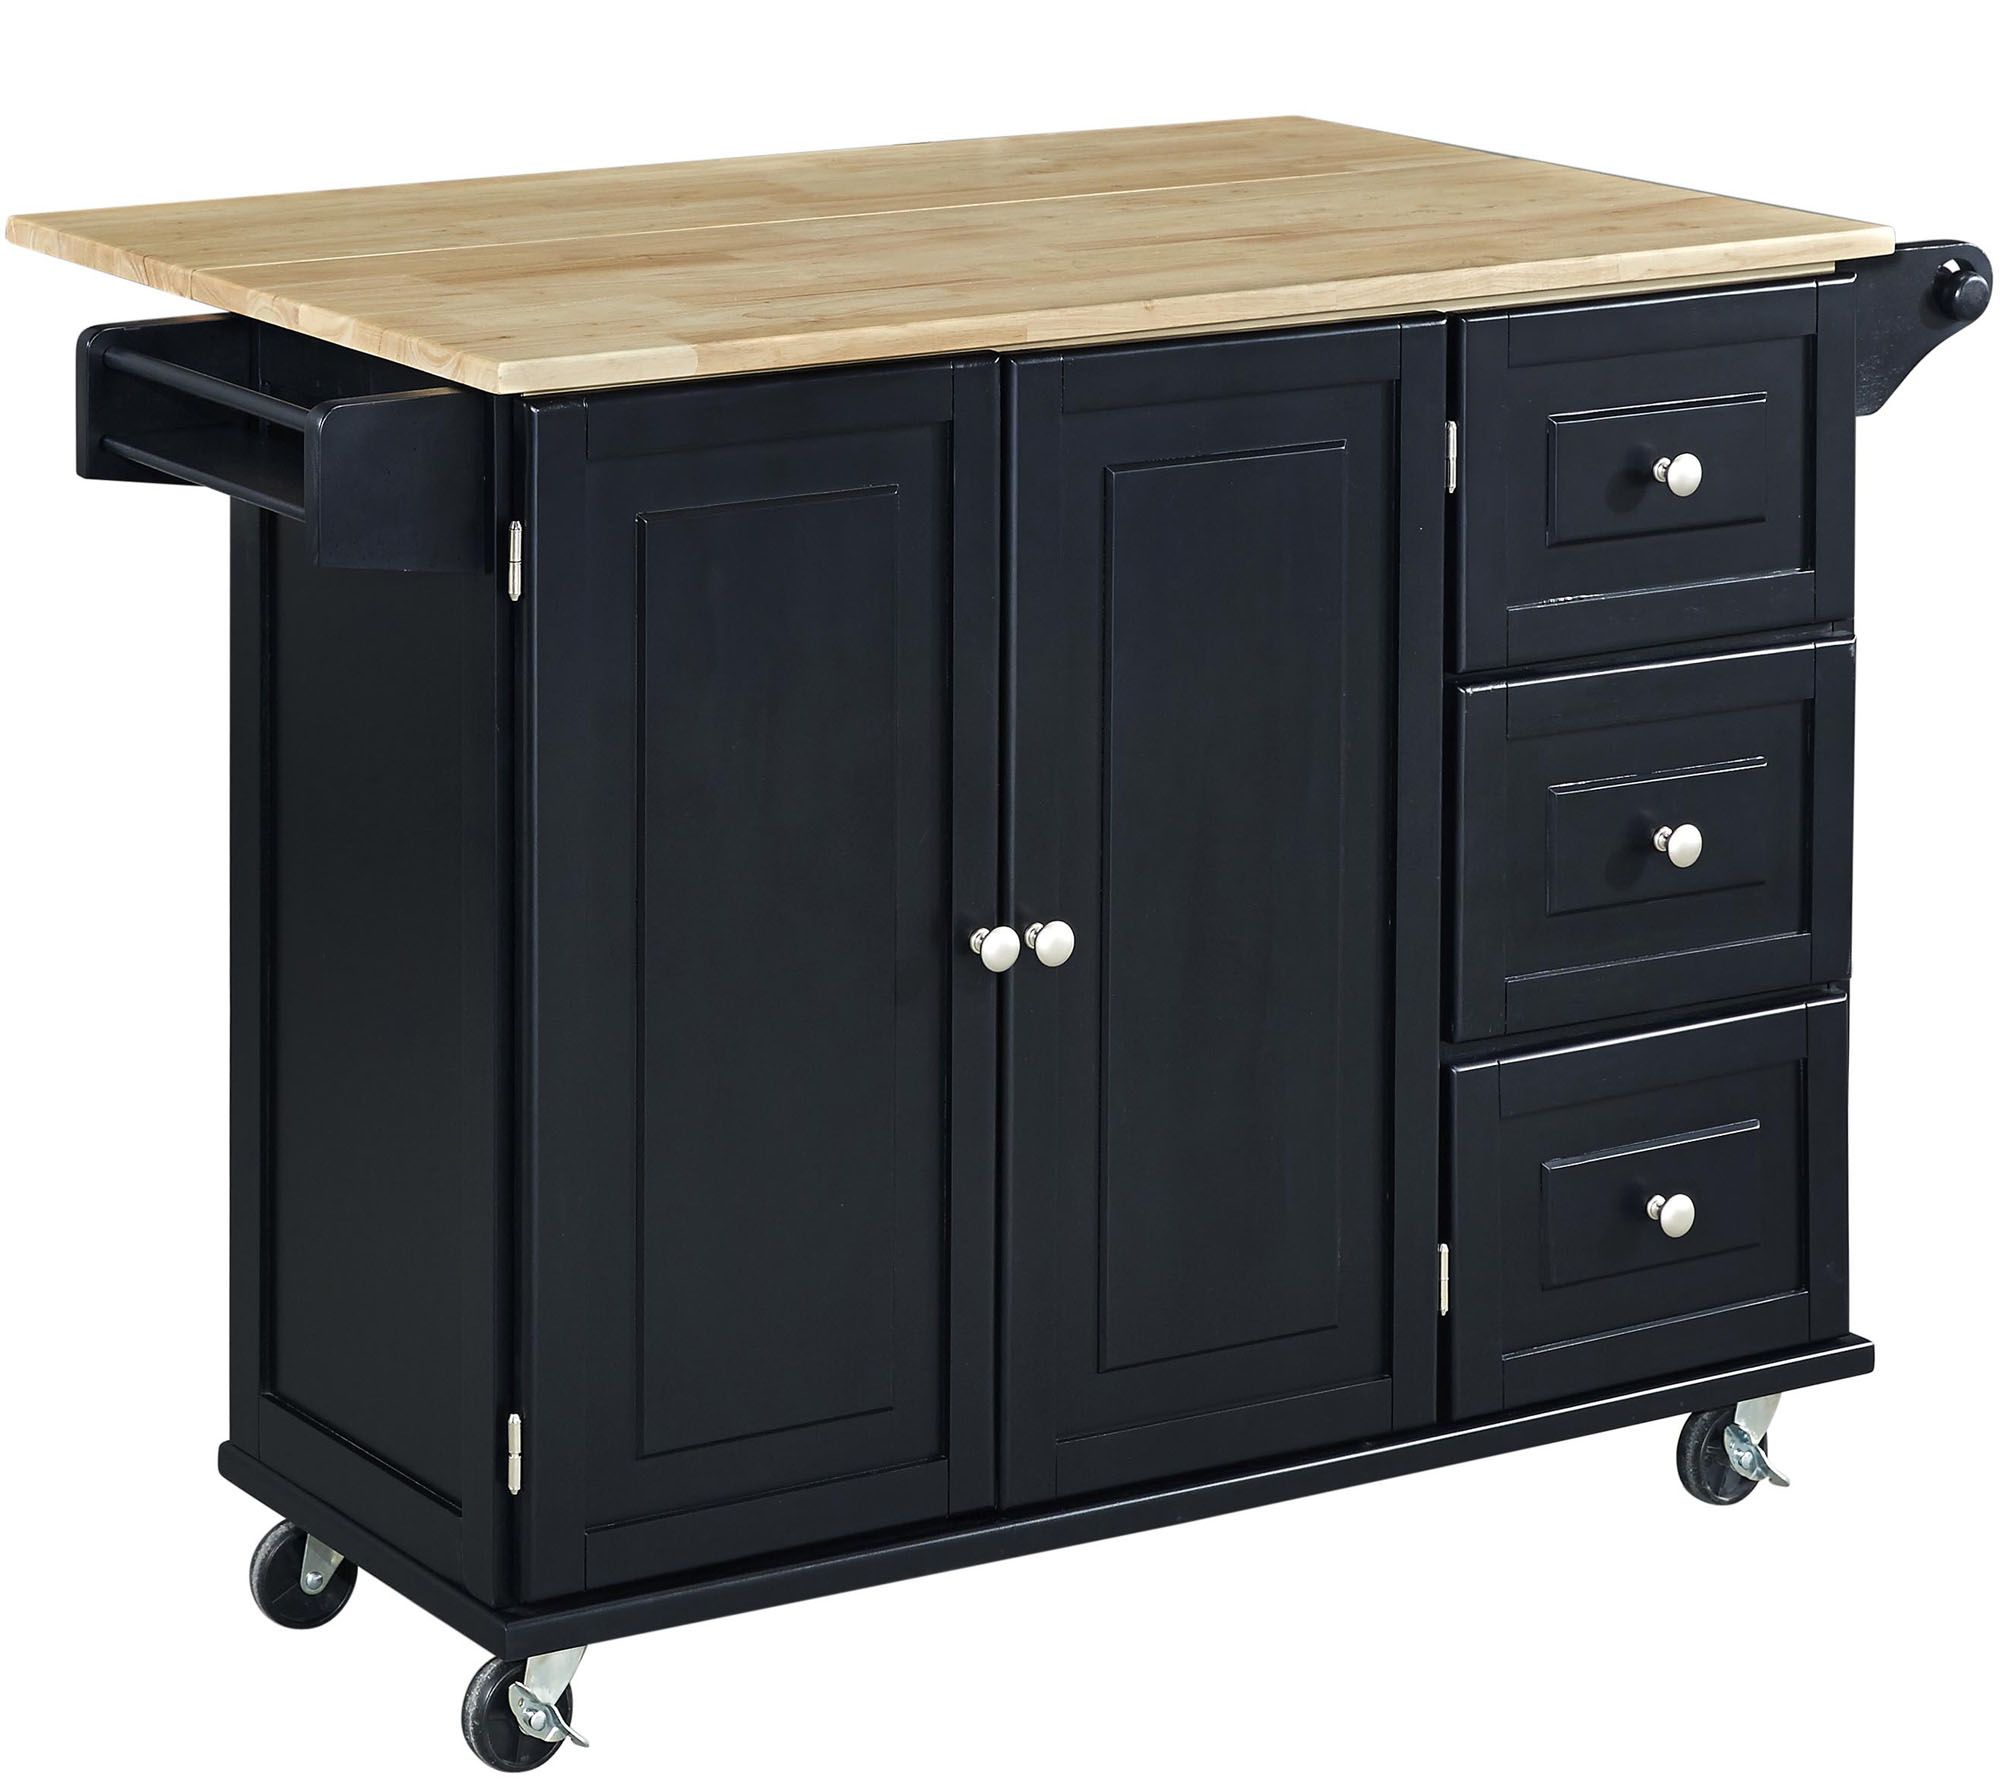 Home Styles Liberty Kitchen Cart with Wood Top - QVC.com